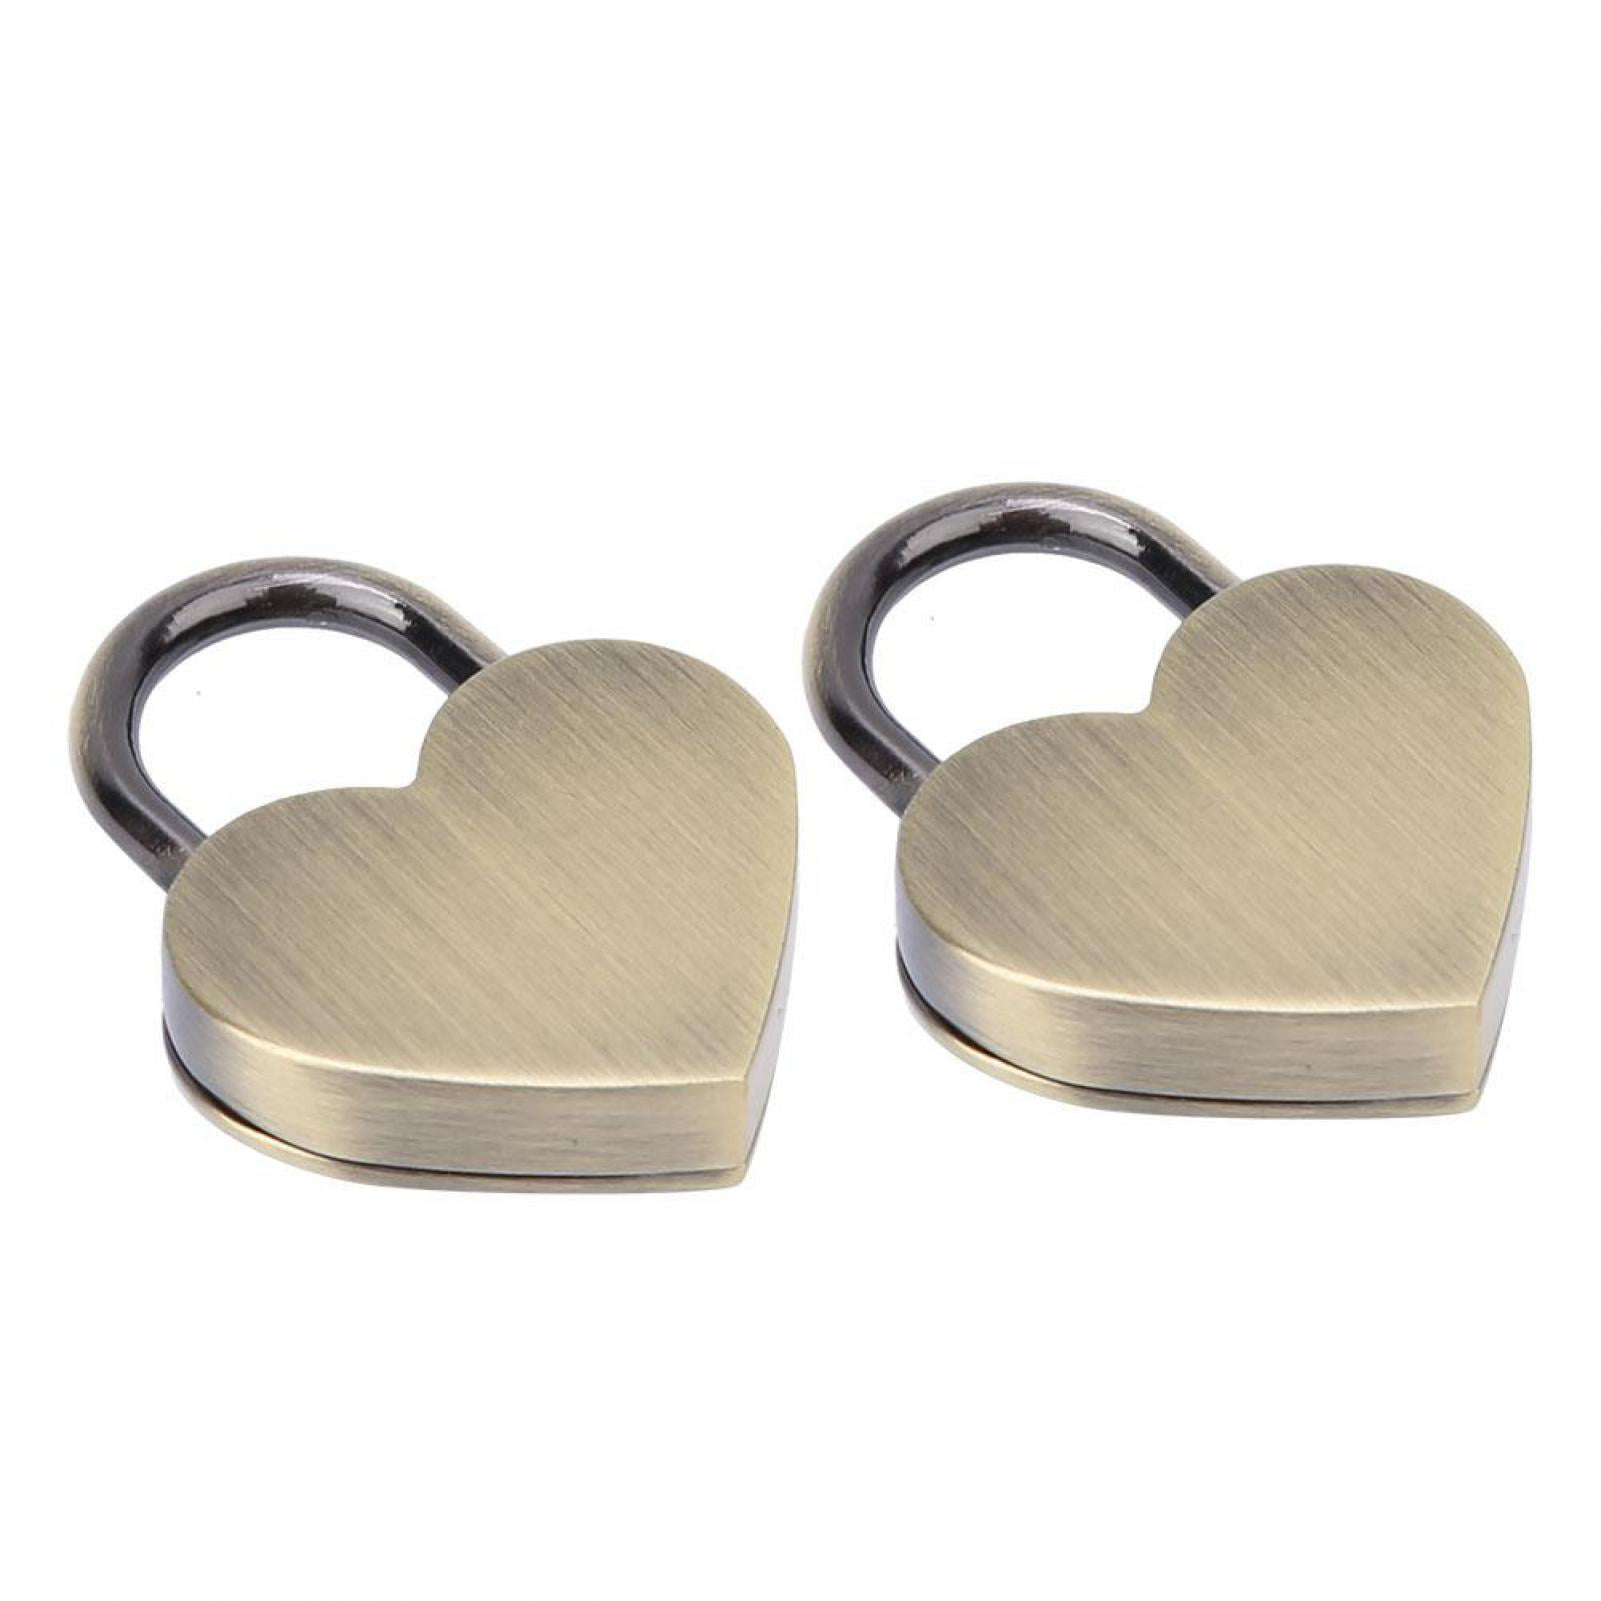 2 Sets High Quality Metal Colored Heart Shaped Lock Padlock with Keys 30x39mm 